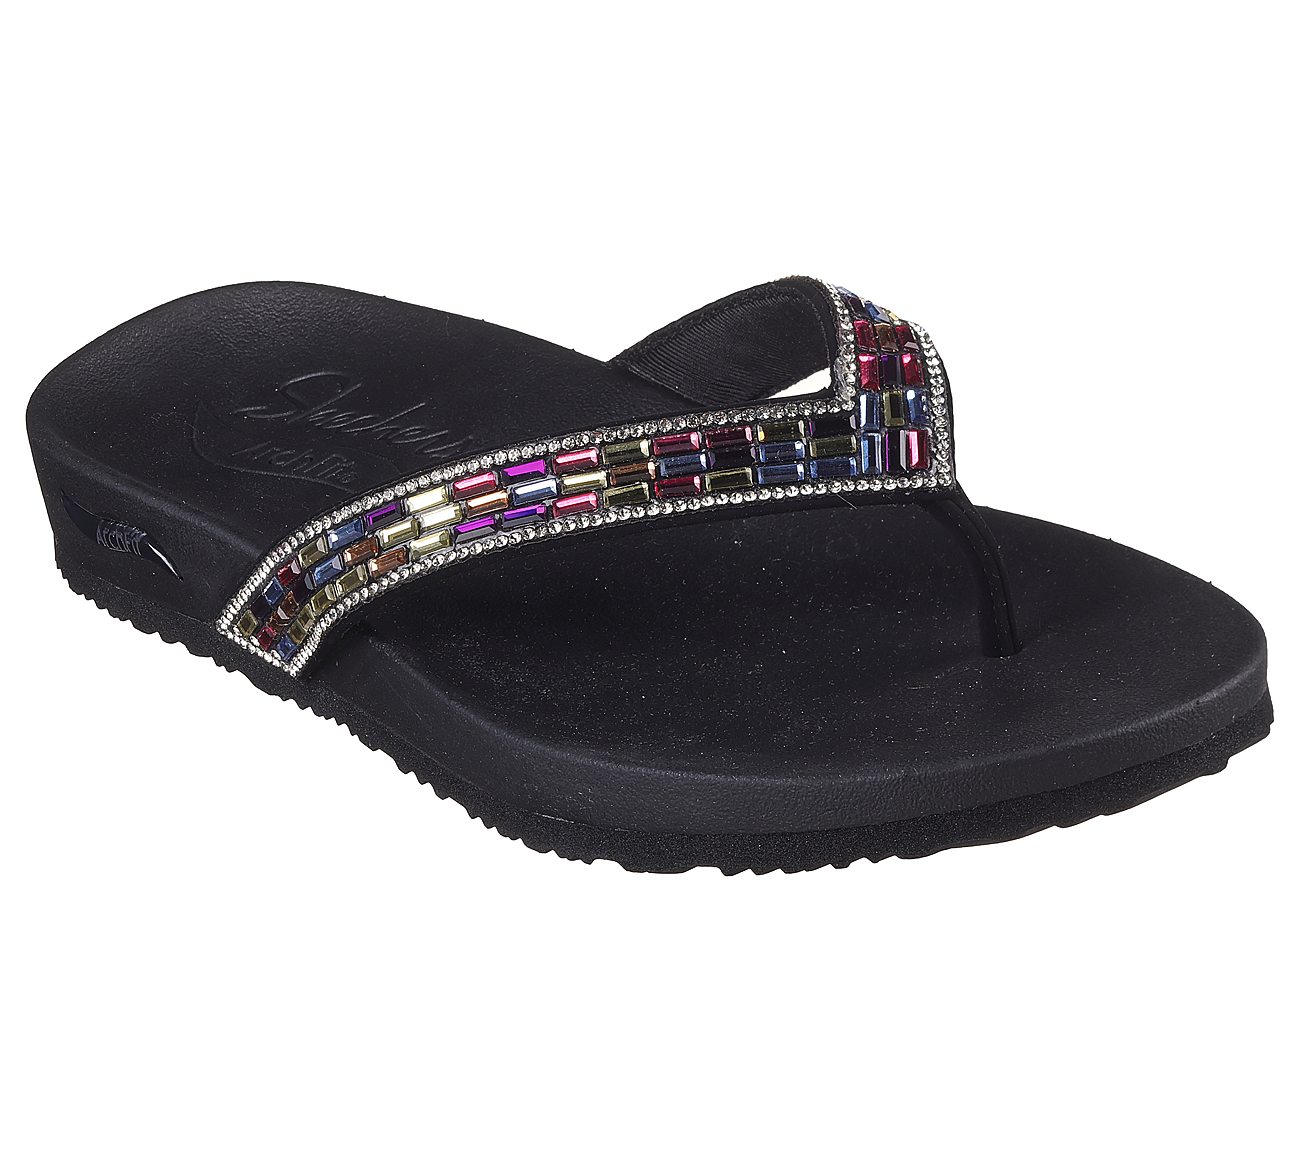 ARCH FIT MEDITATION, BLACK/MULTI Footwear Lateral View